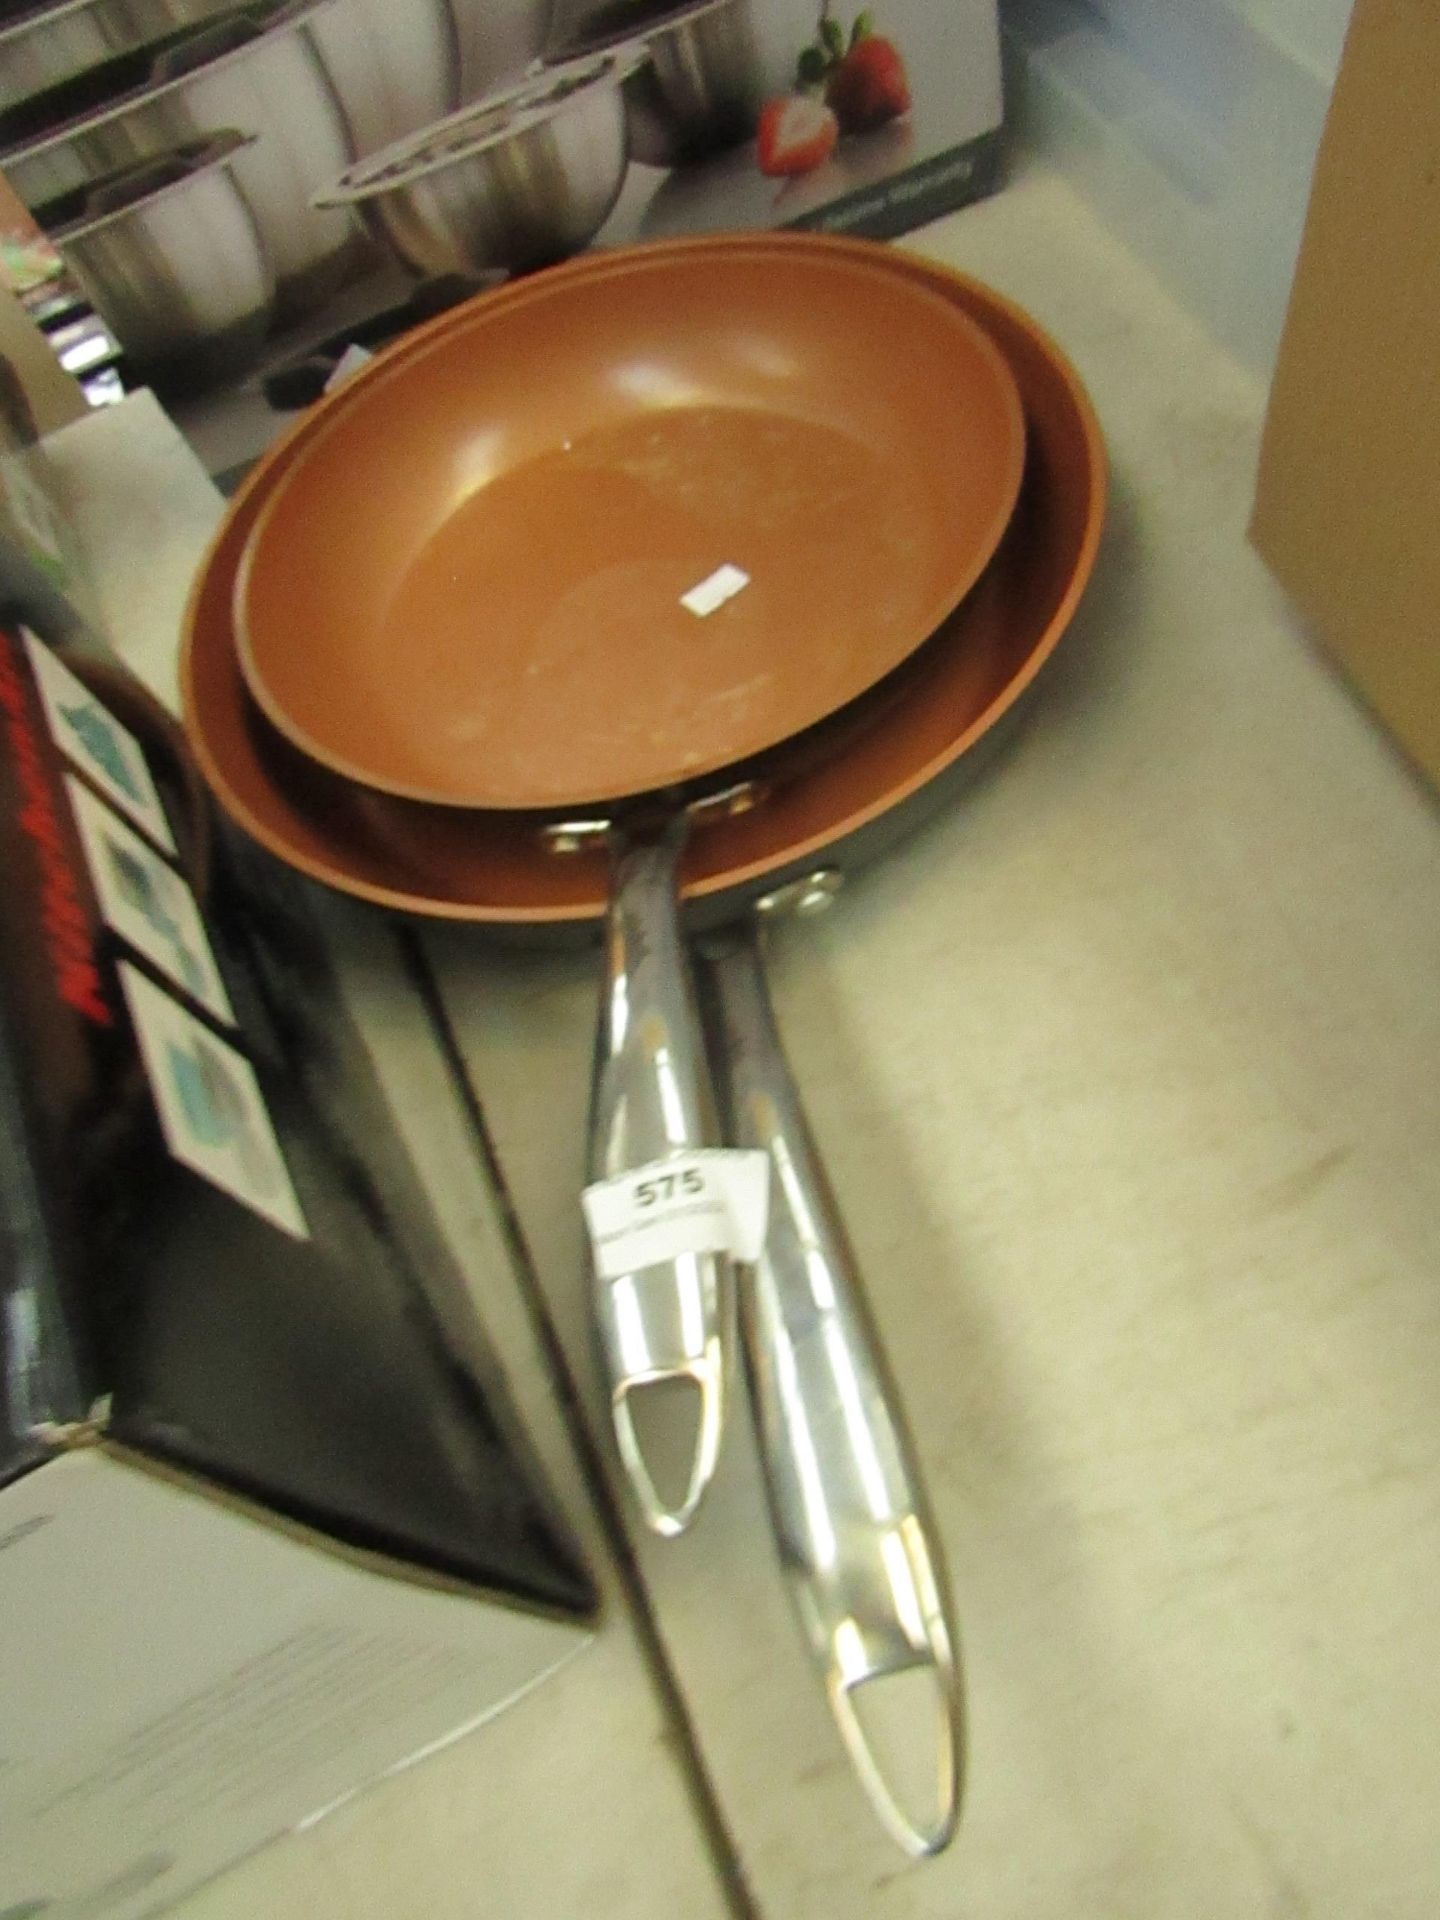 2x Frying pans - Look well Used with a Few Marks - Unboxed